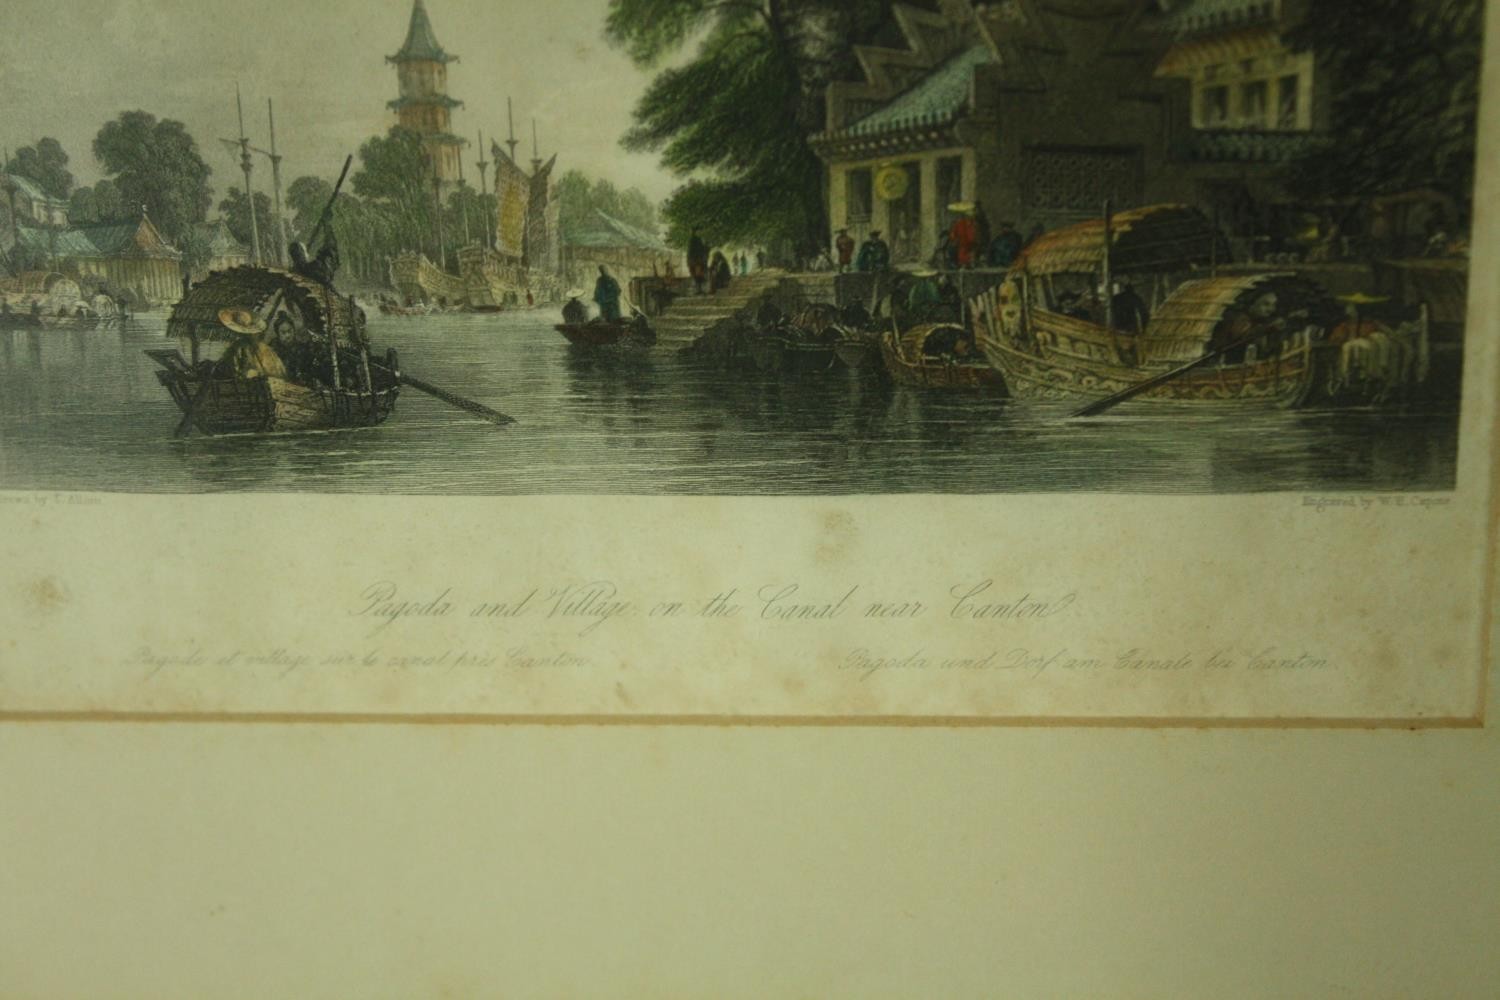 Thomas Allom, two coloured engravings, views of China entitled 'Pagoda and village on the canal near - Bild 3 aus 7